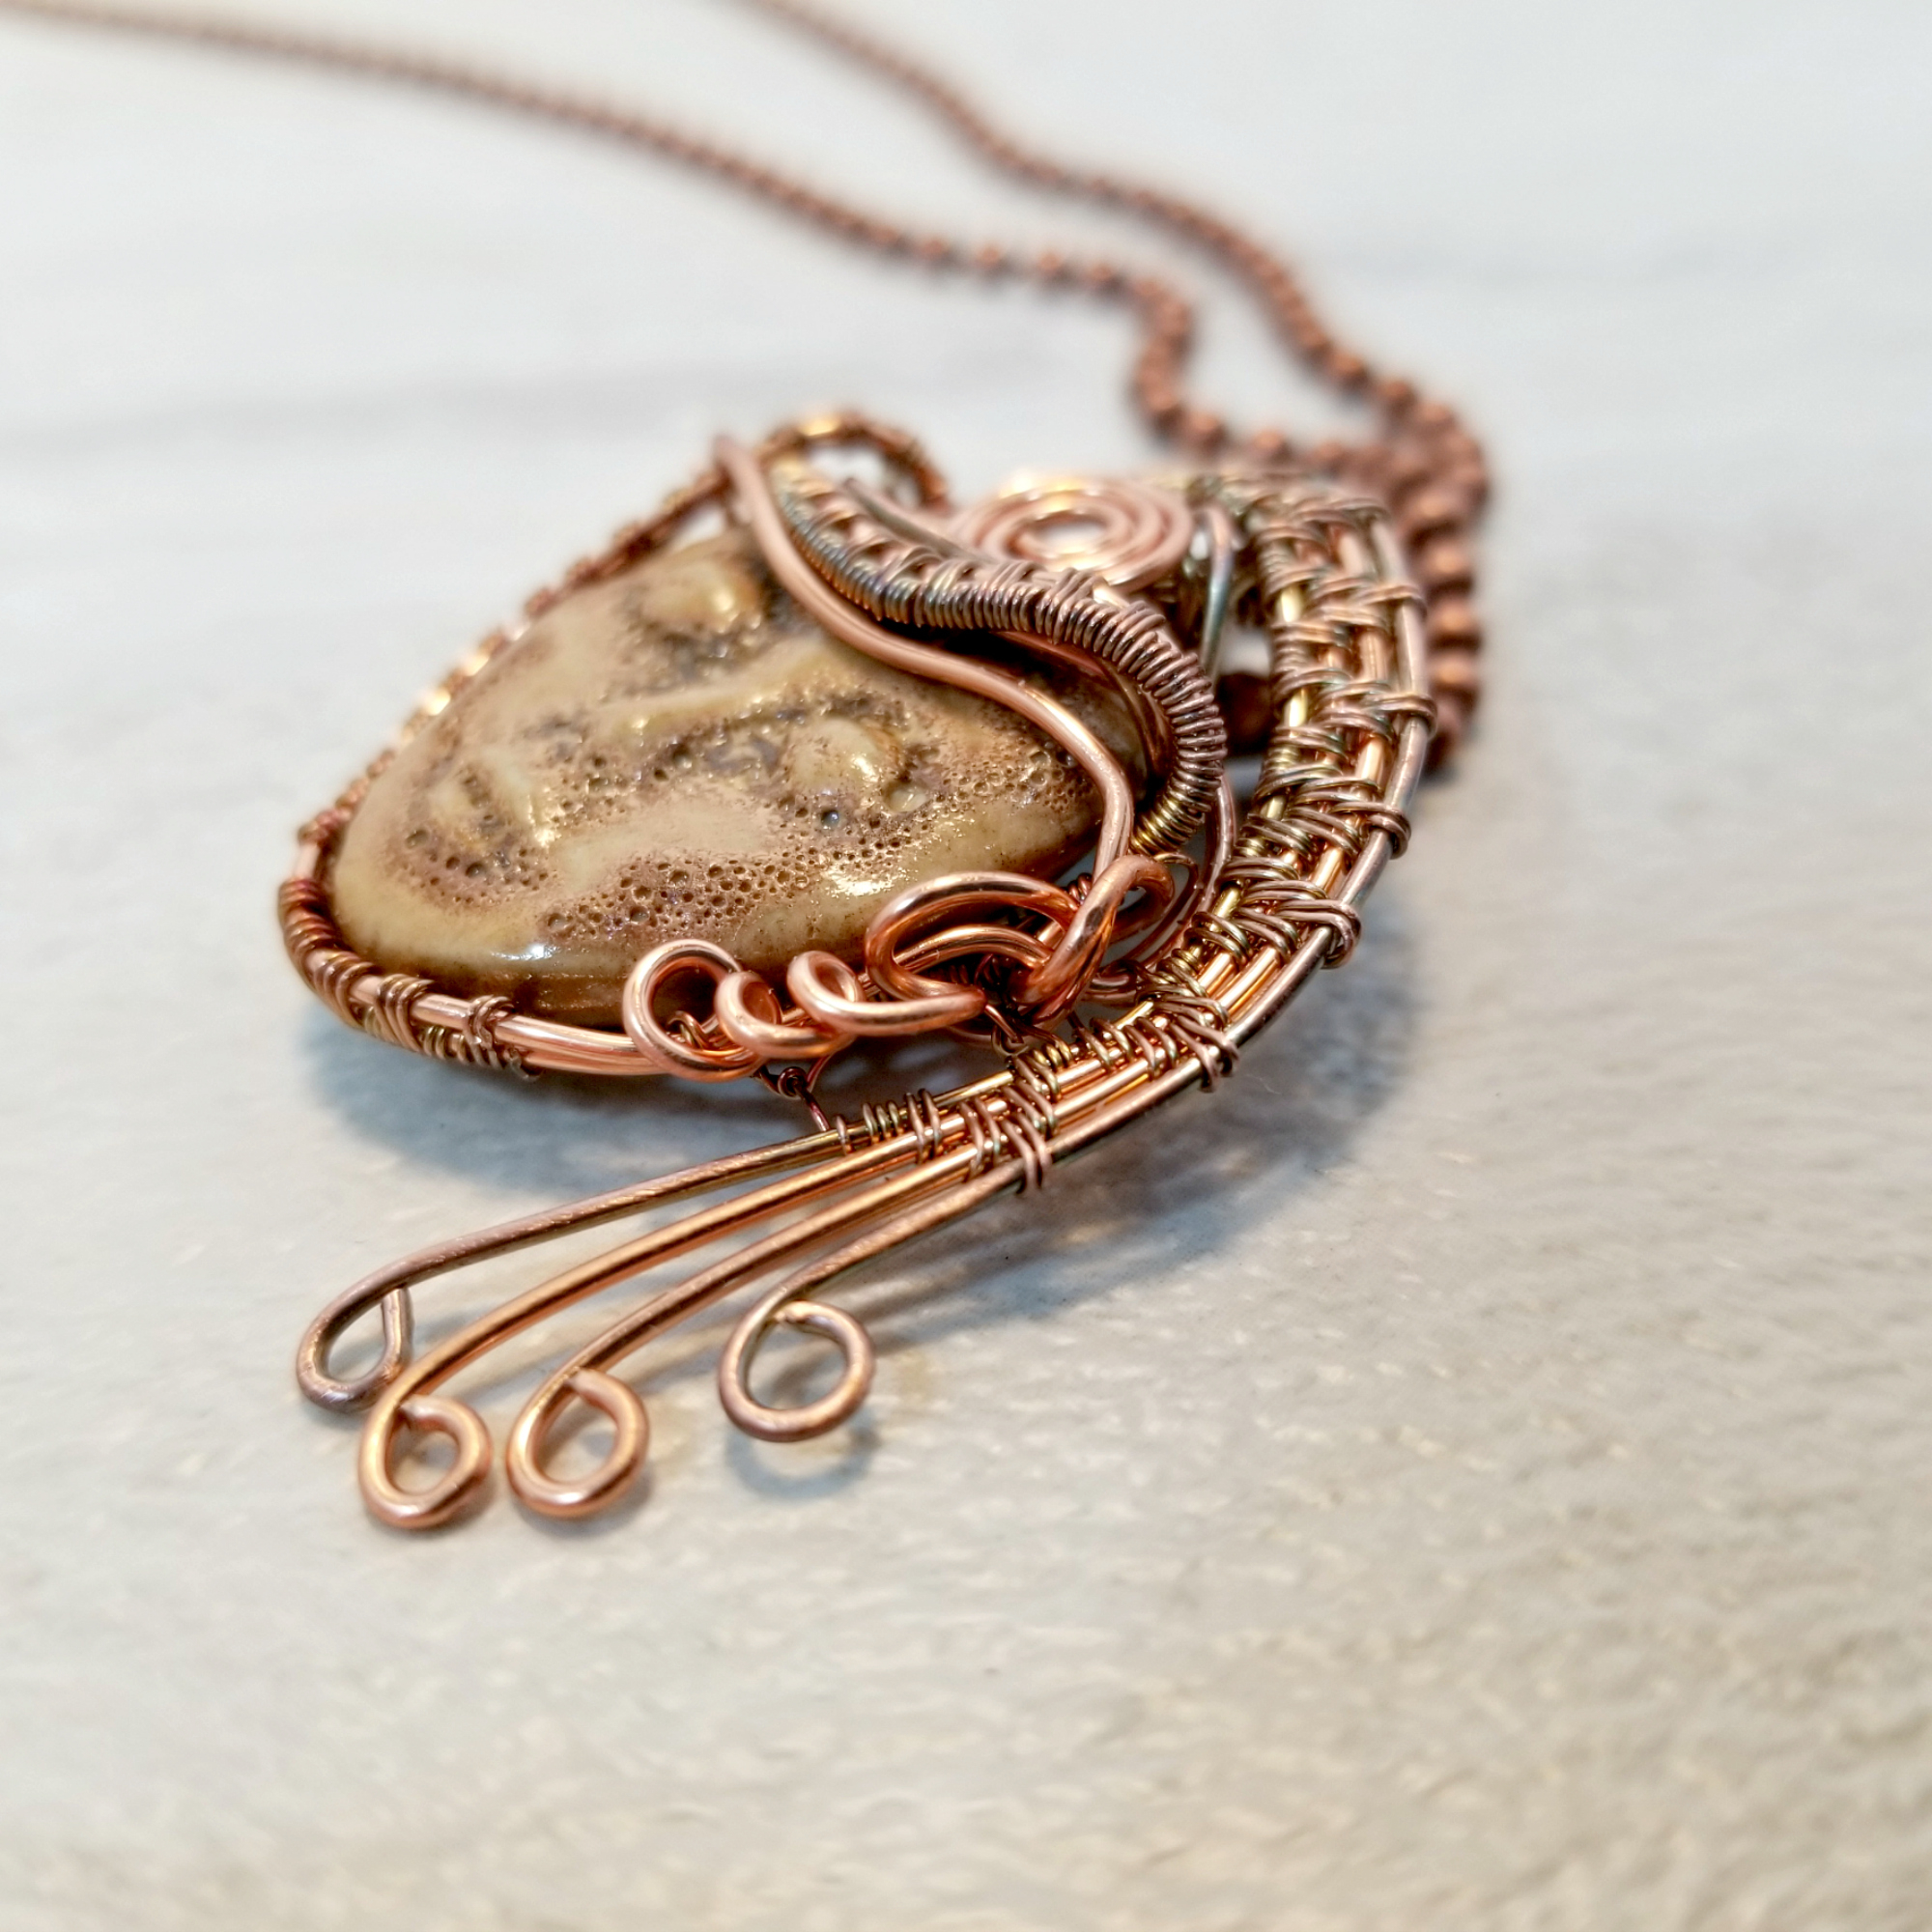 A handmade copper wire wrap pendant with a moonstone cabochon. Selene moon goddess